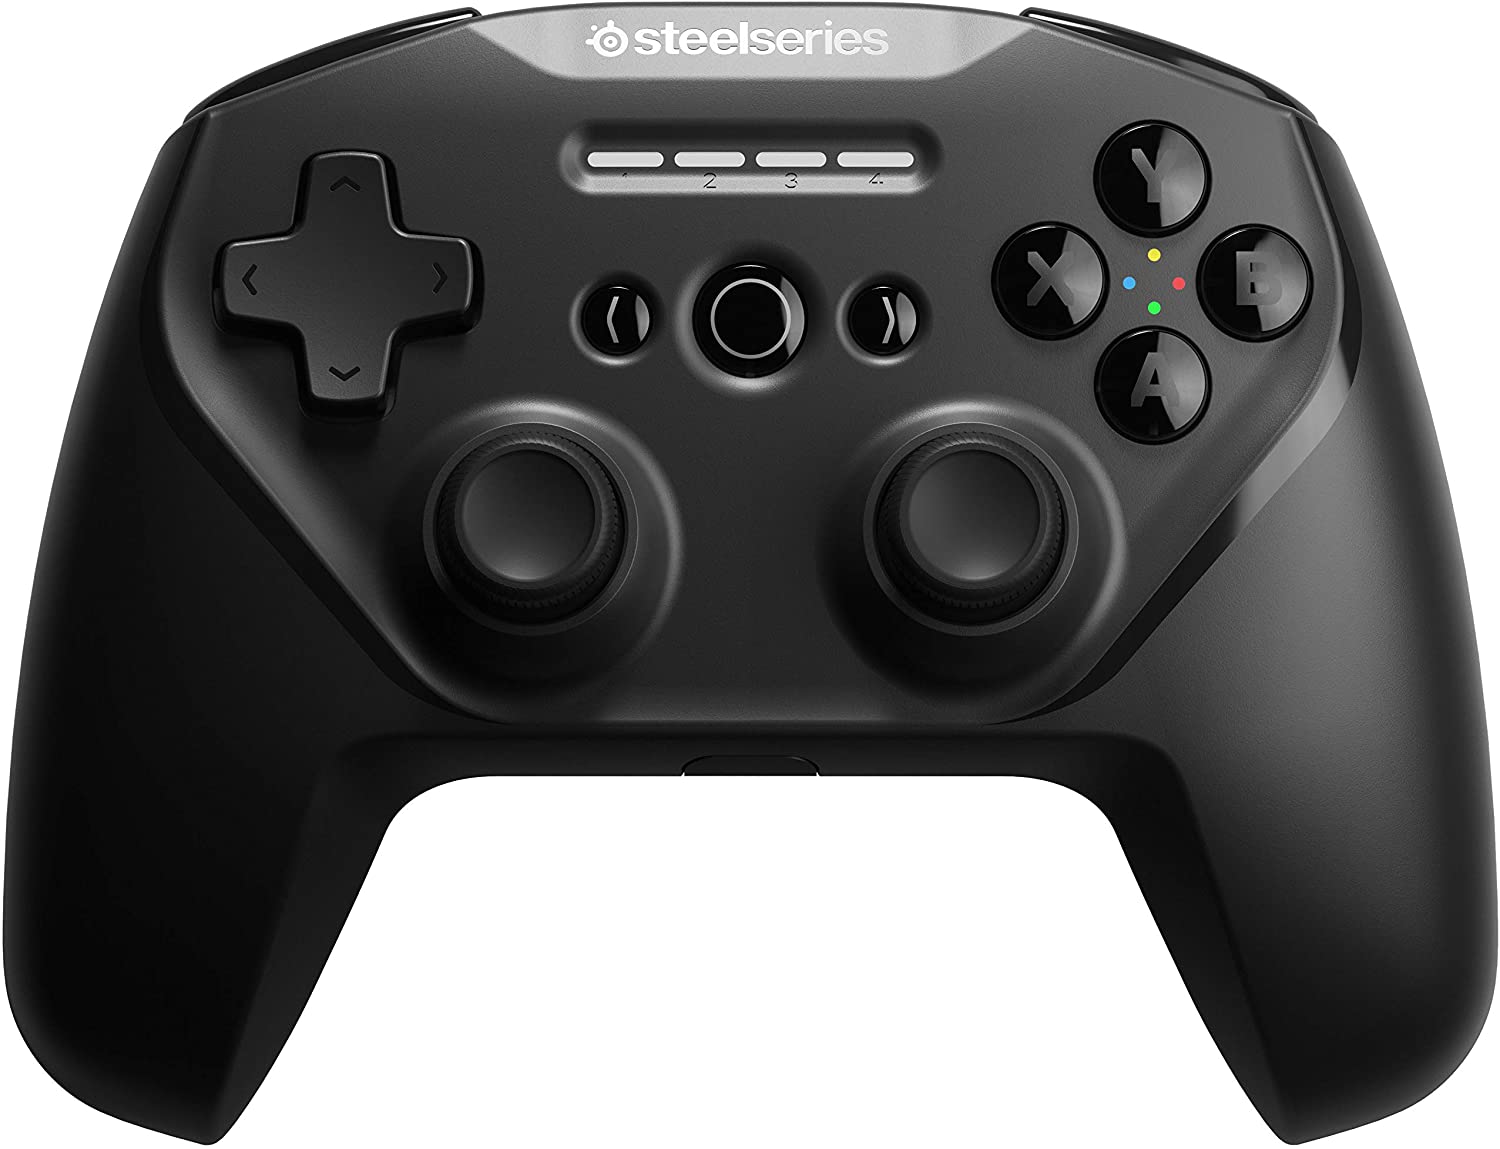 The best PC controllers for 2022